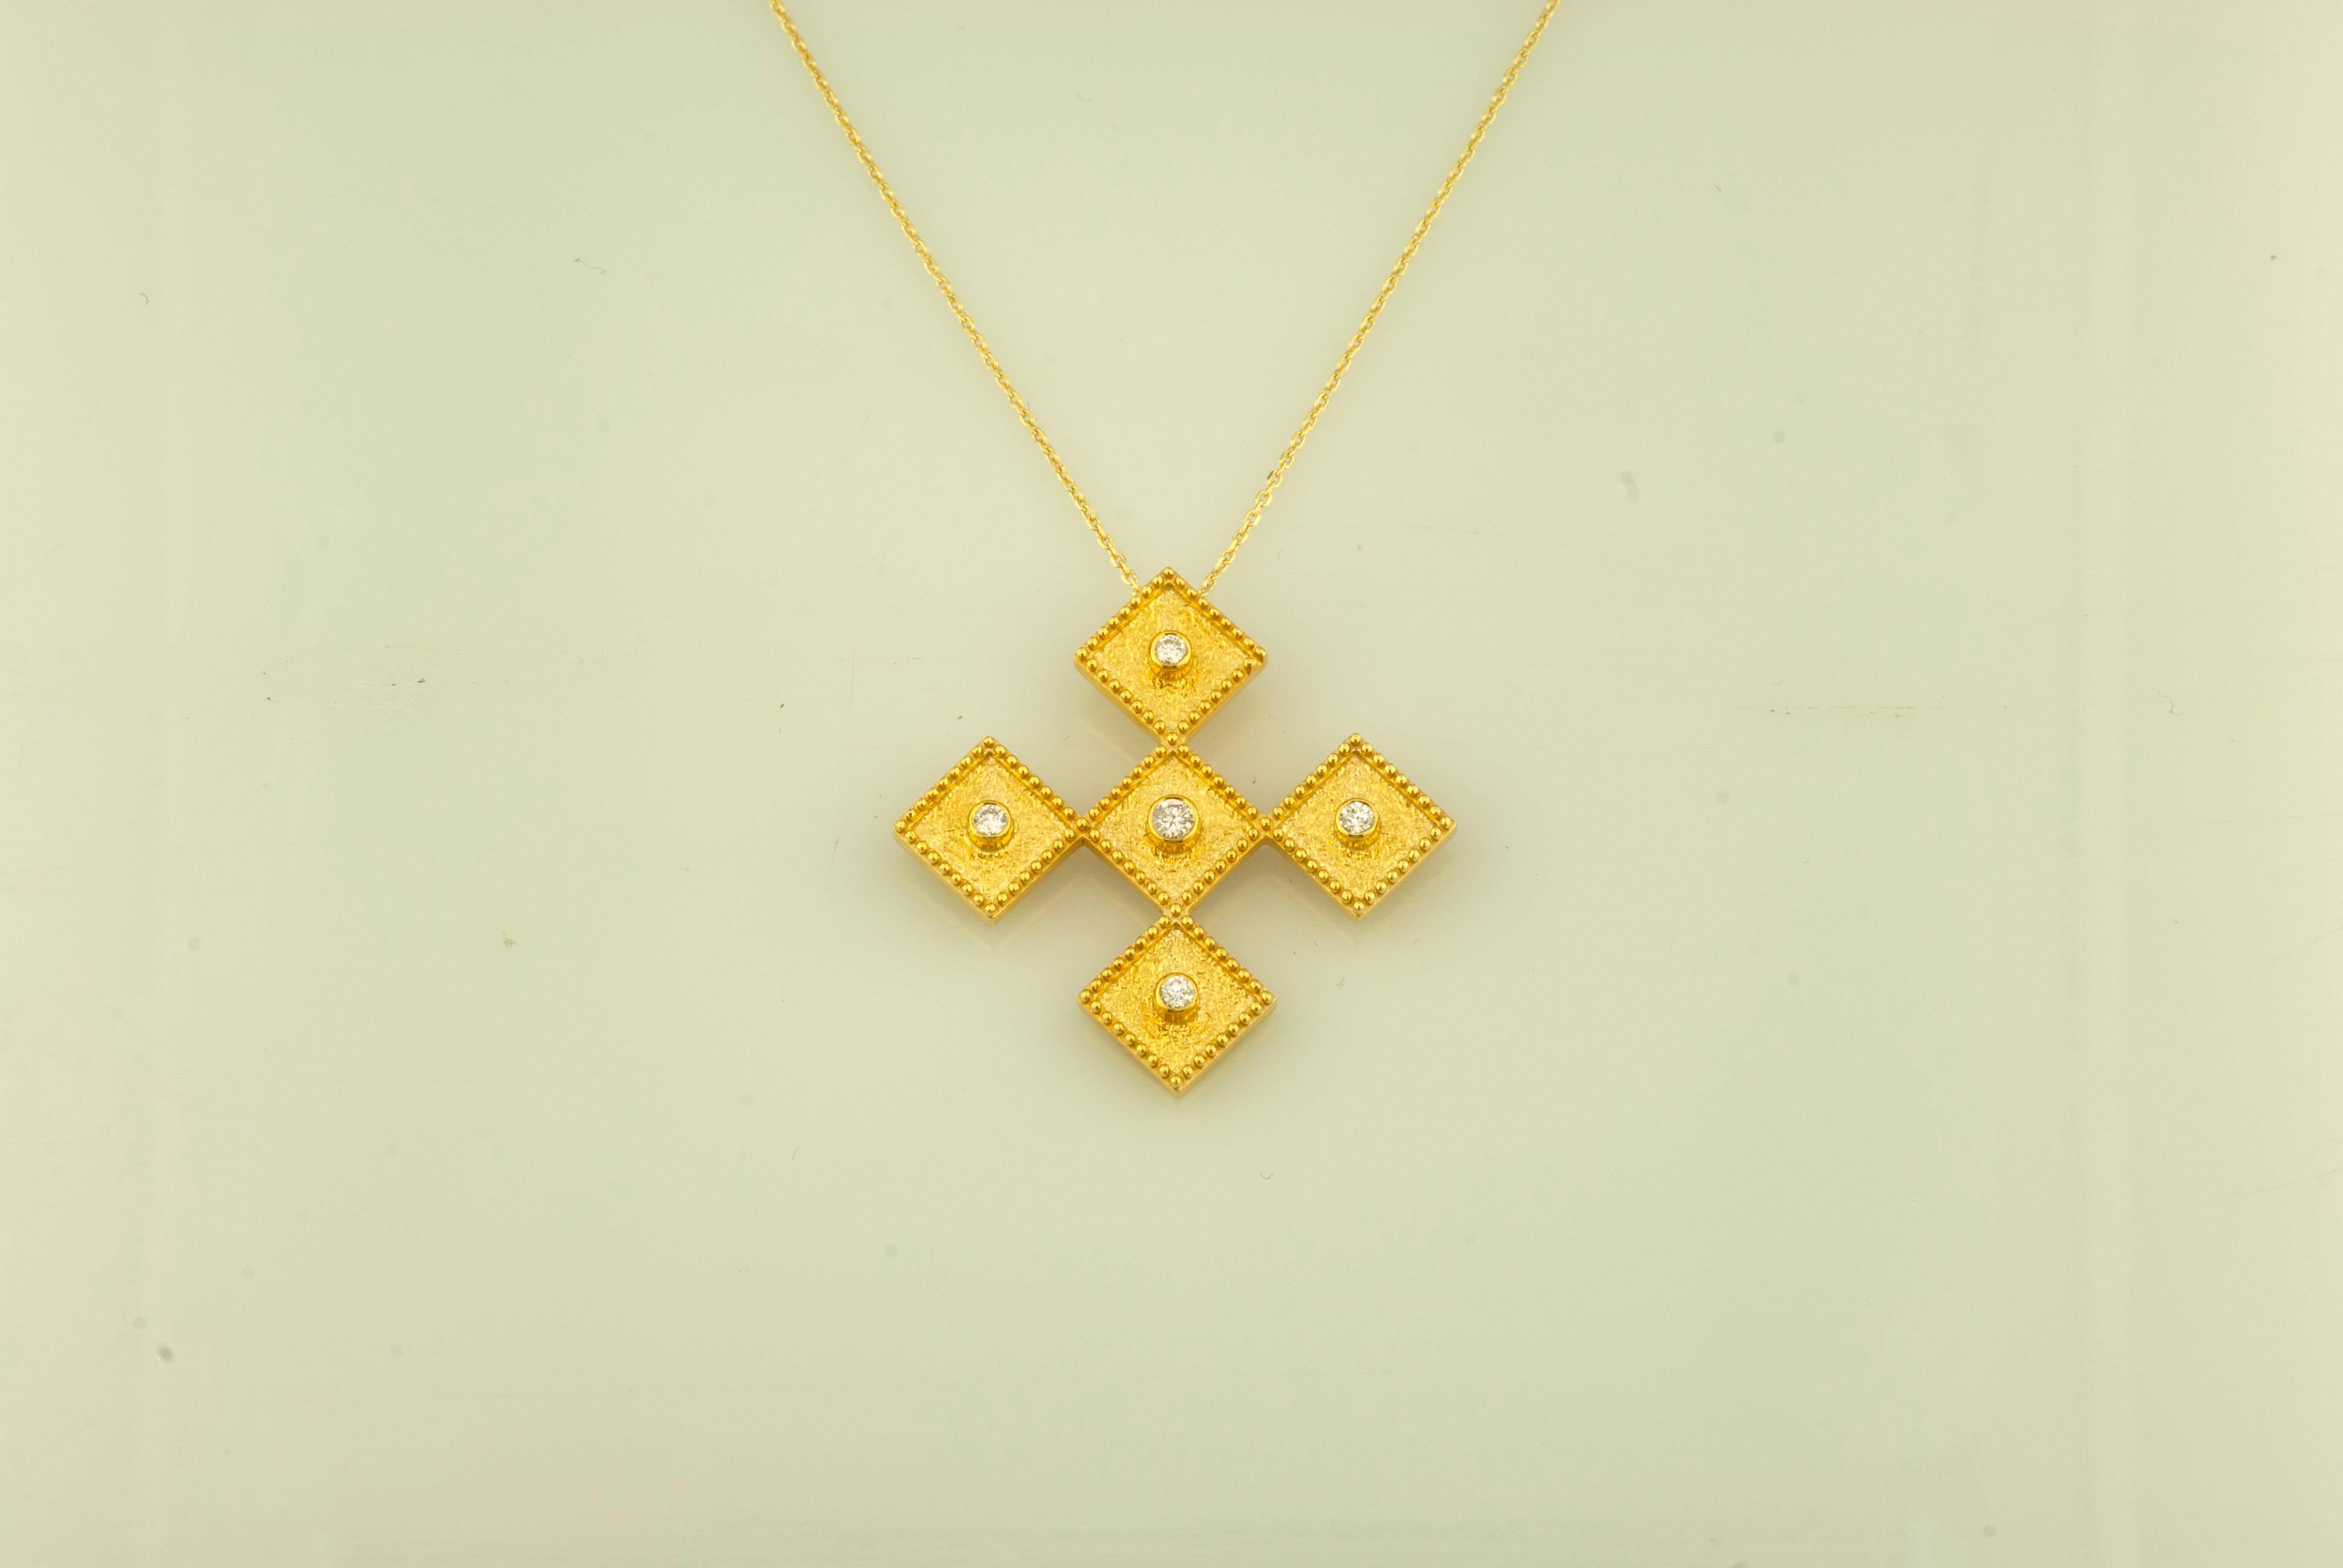 This S.Georgios designer 18 Karat Gold Rhombus shaped cross pendant necklace and chain is handmade with microscopically decorated Byzantine-style granulation work and is finished with a unique velvet background look. This gorgeous cross pendant